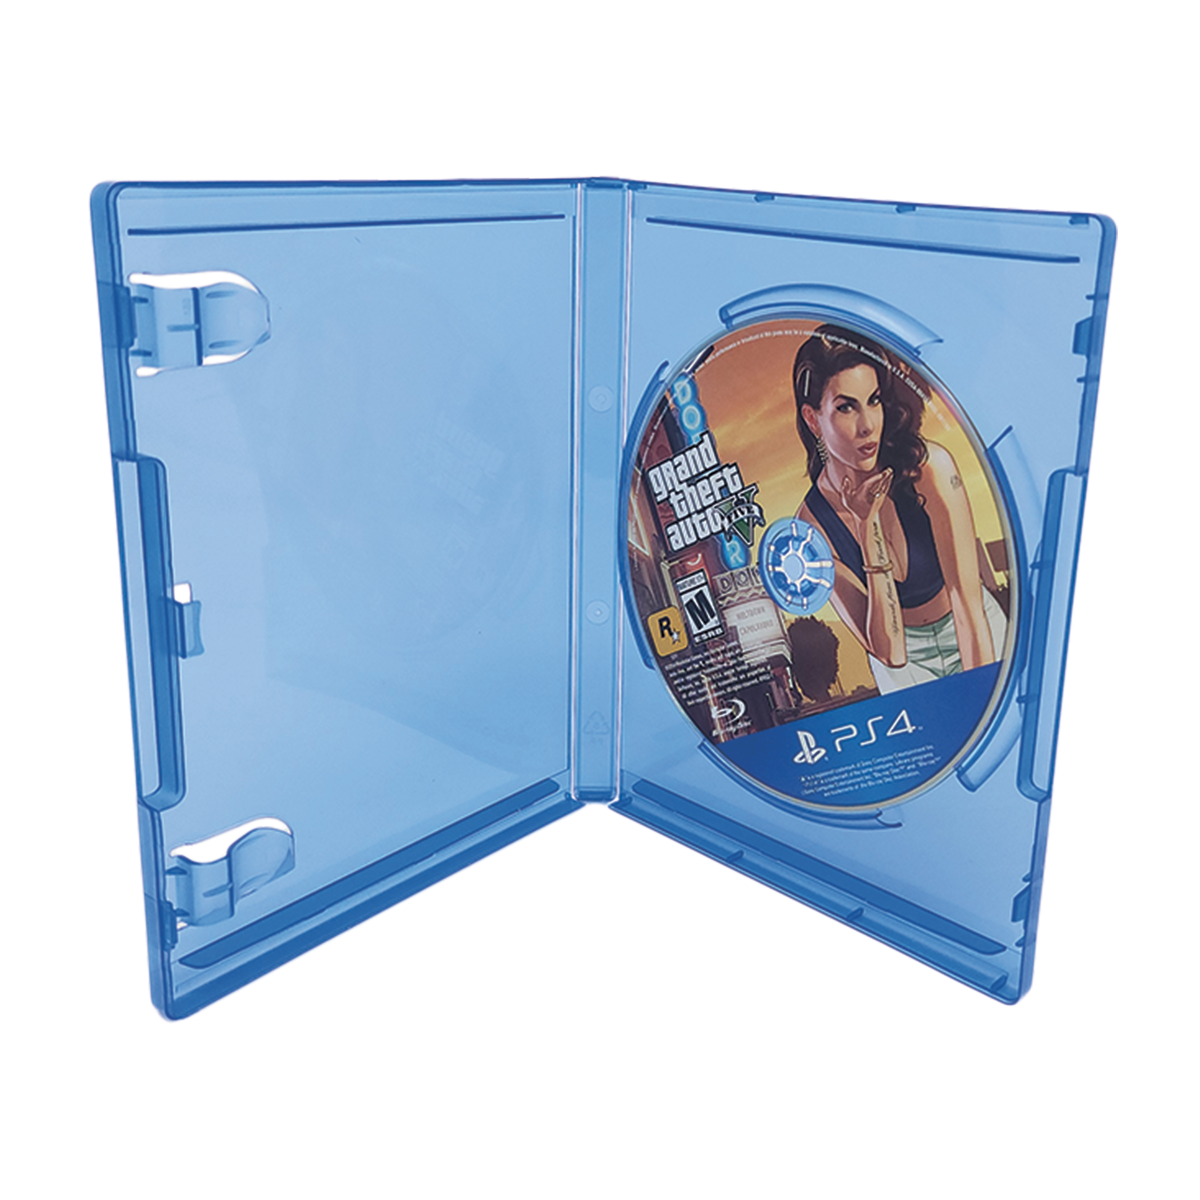 PS4 Game Case (Case of 100)